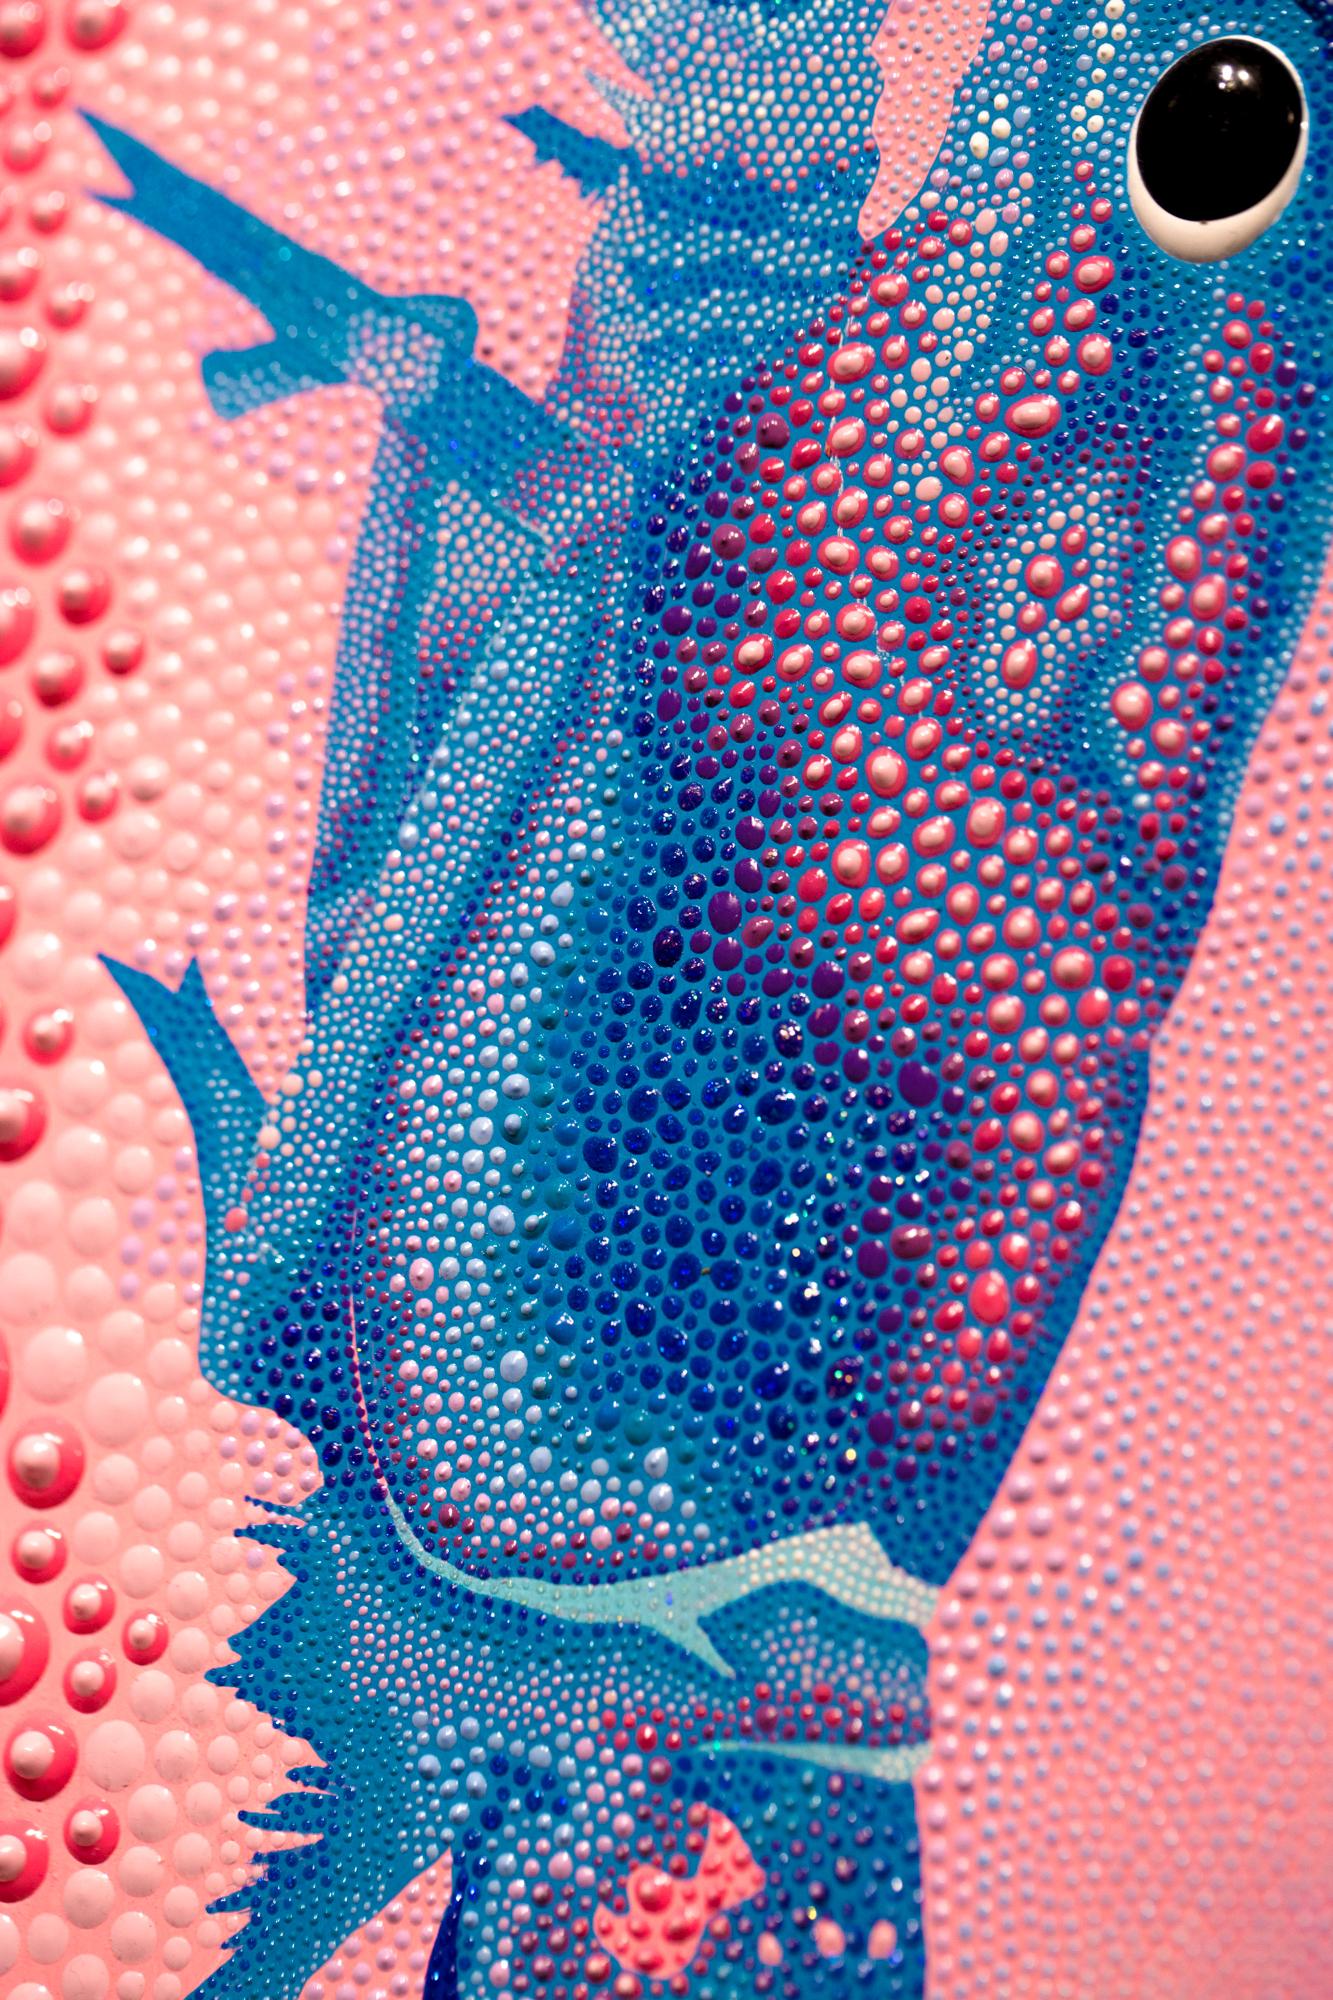 Cotton Candy Crayfish - Painting by PJ Linden